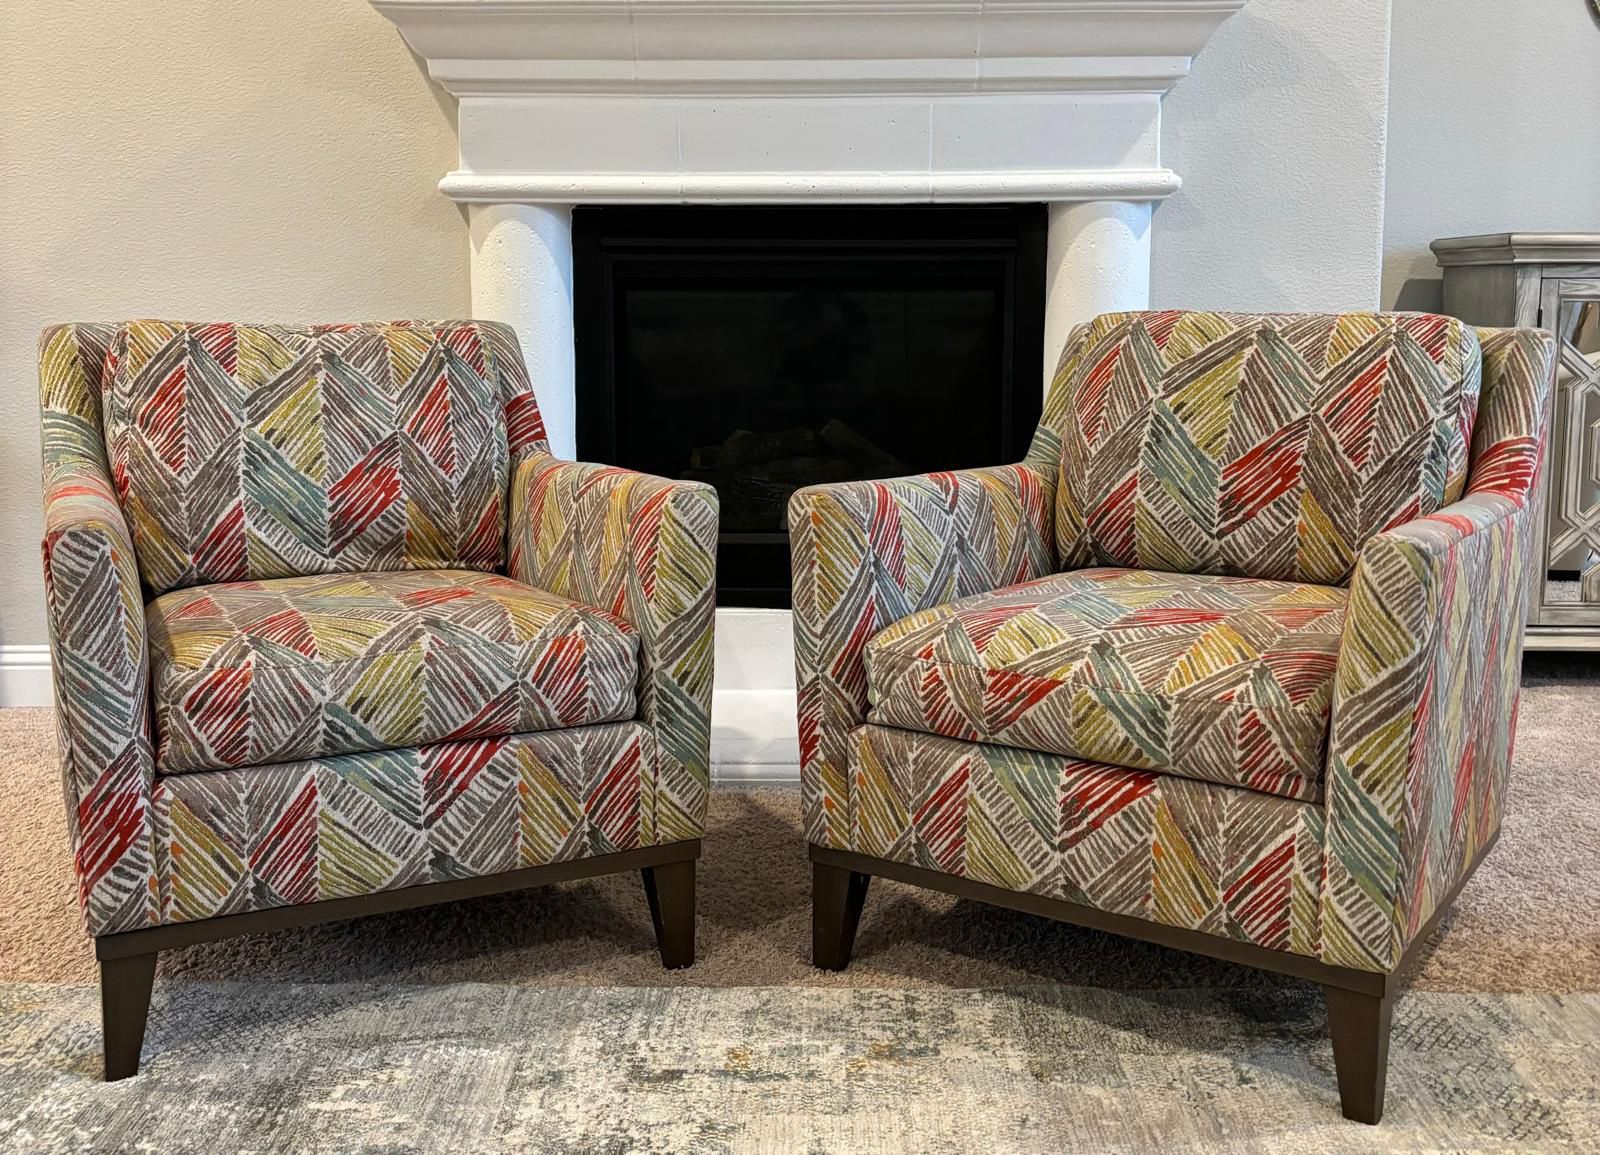 2 Arm Chairs In Brand-New Condition